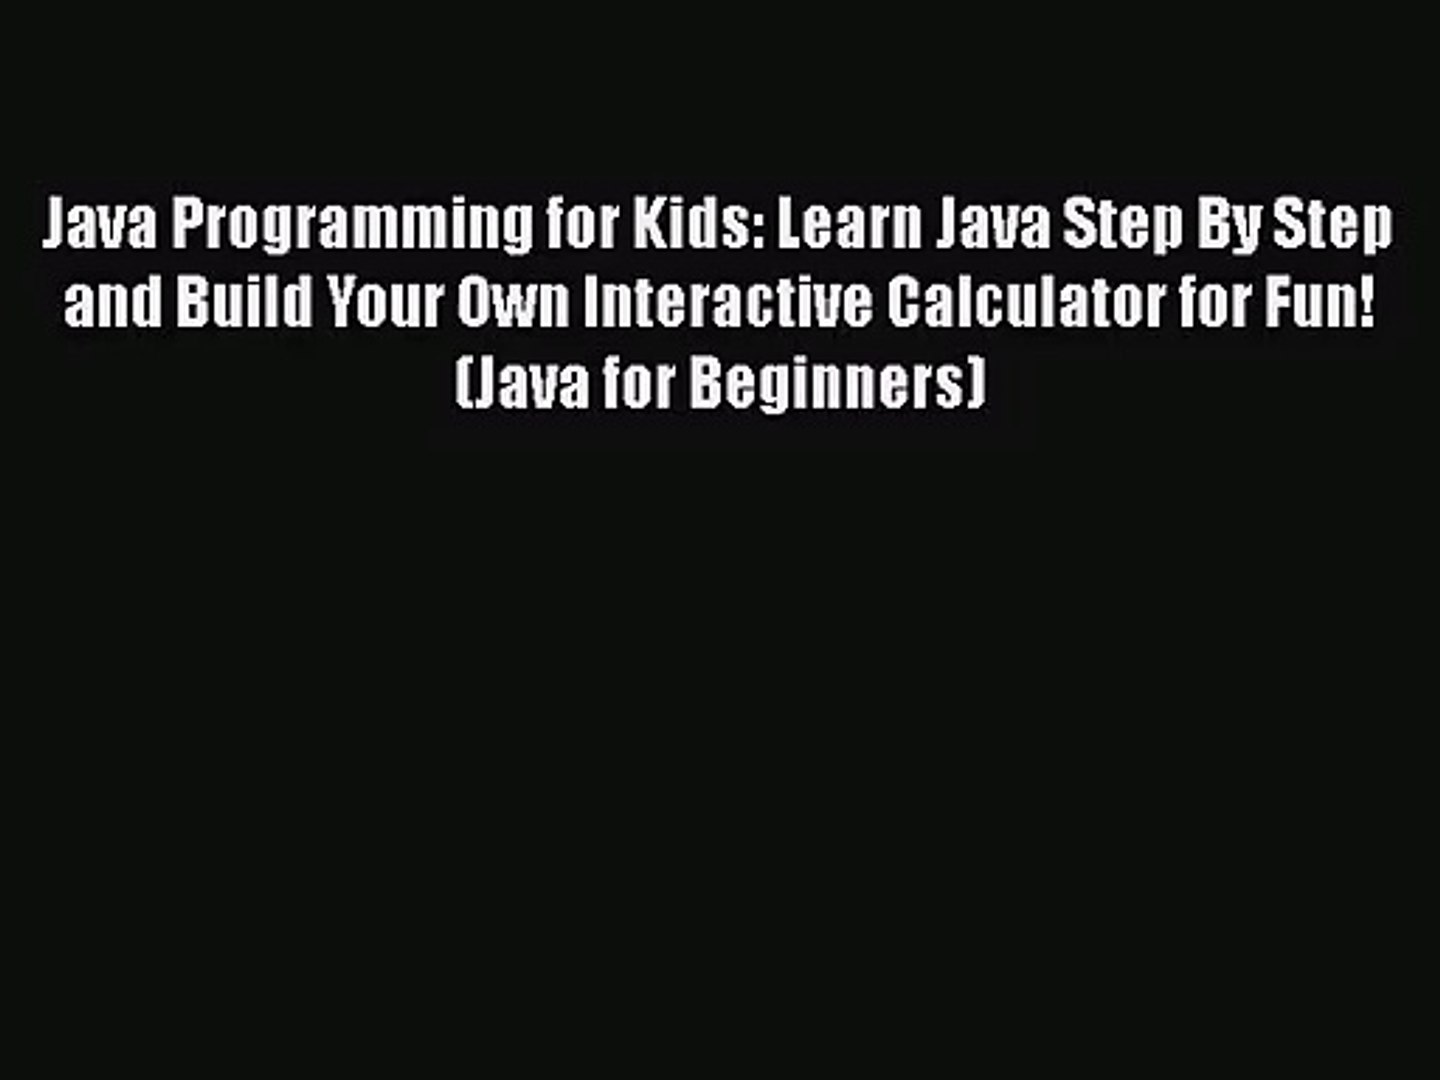 Java Programming for Kids: Learn Java Step By Step and Build Your Own Interactive Calculator